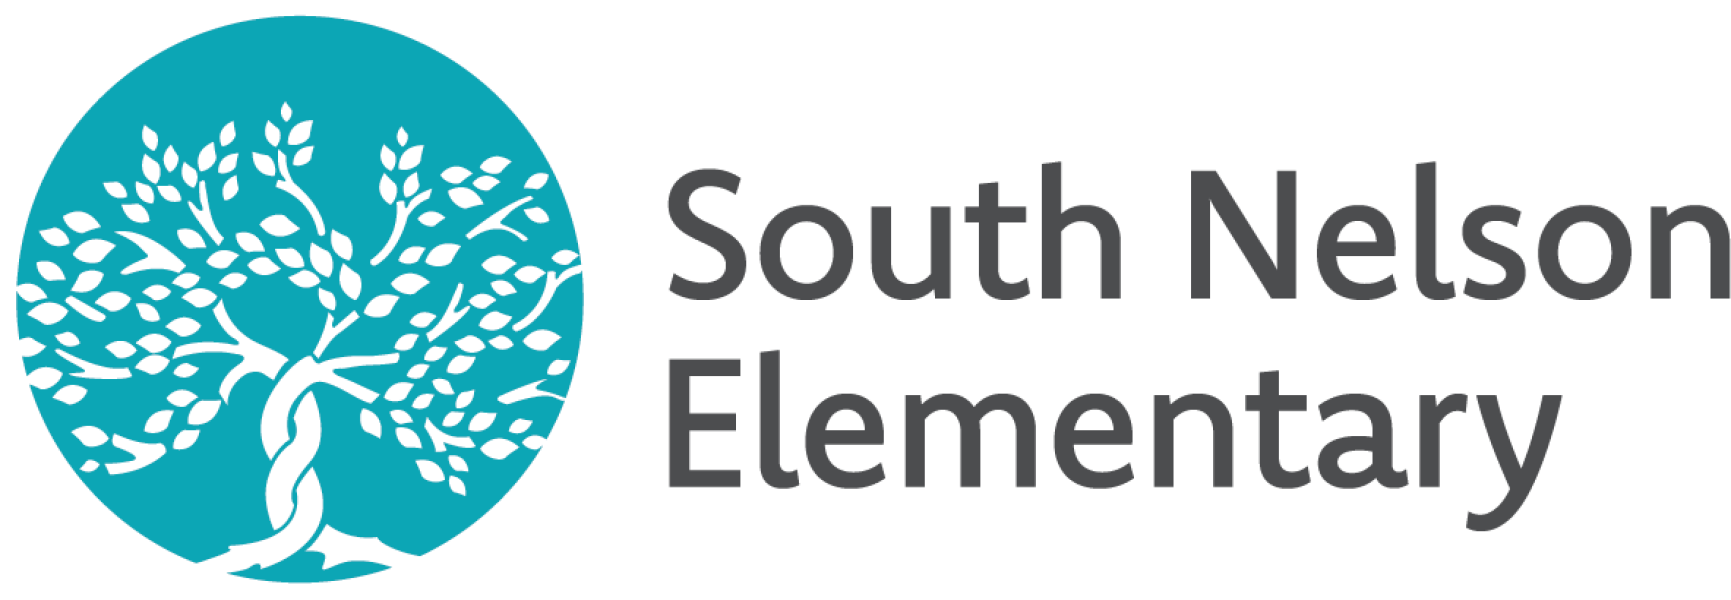 Teal green circle with white tree of life inside and to the right outside the circle, grey text that reads South Nelson Elementary.